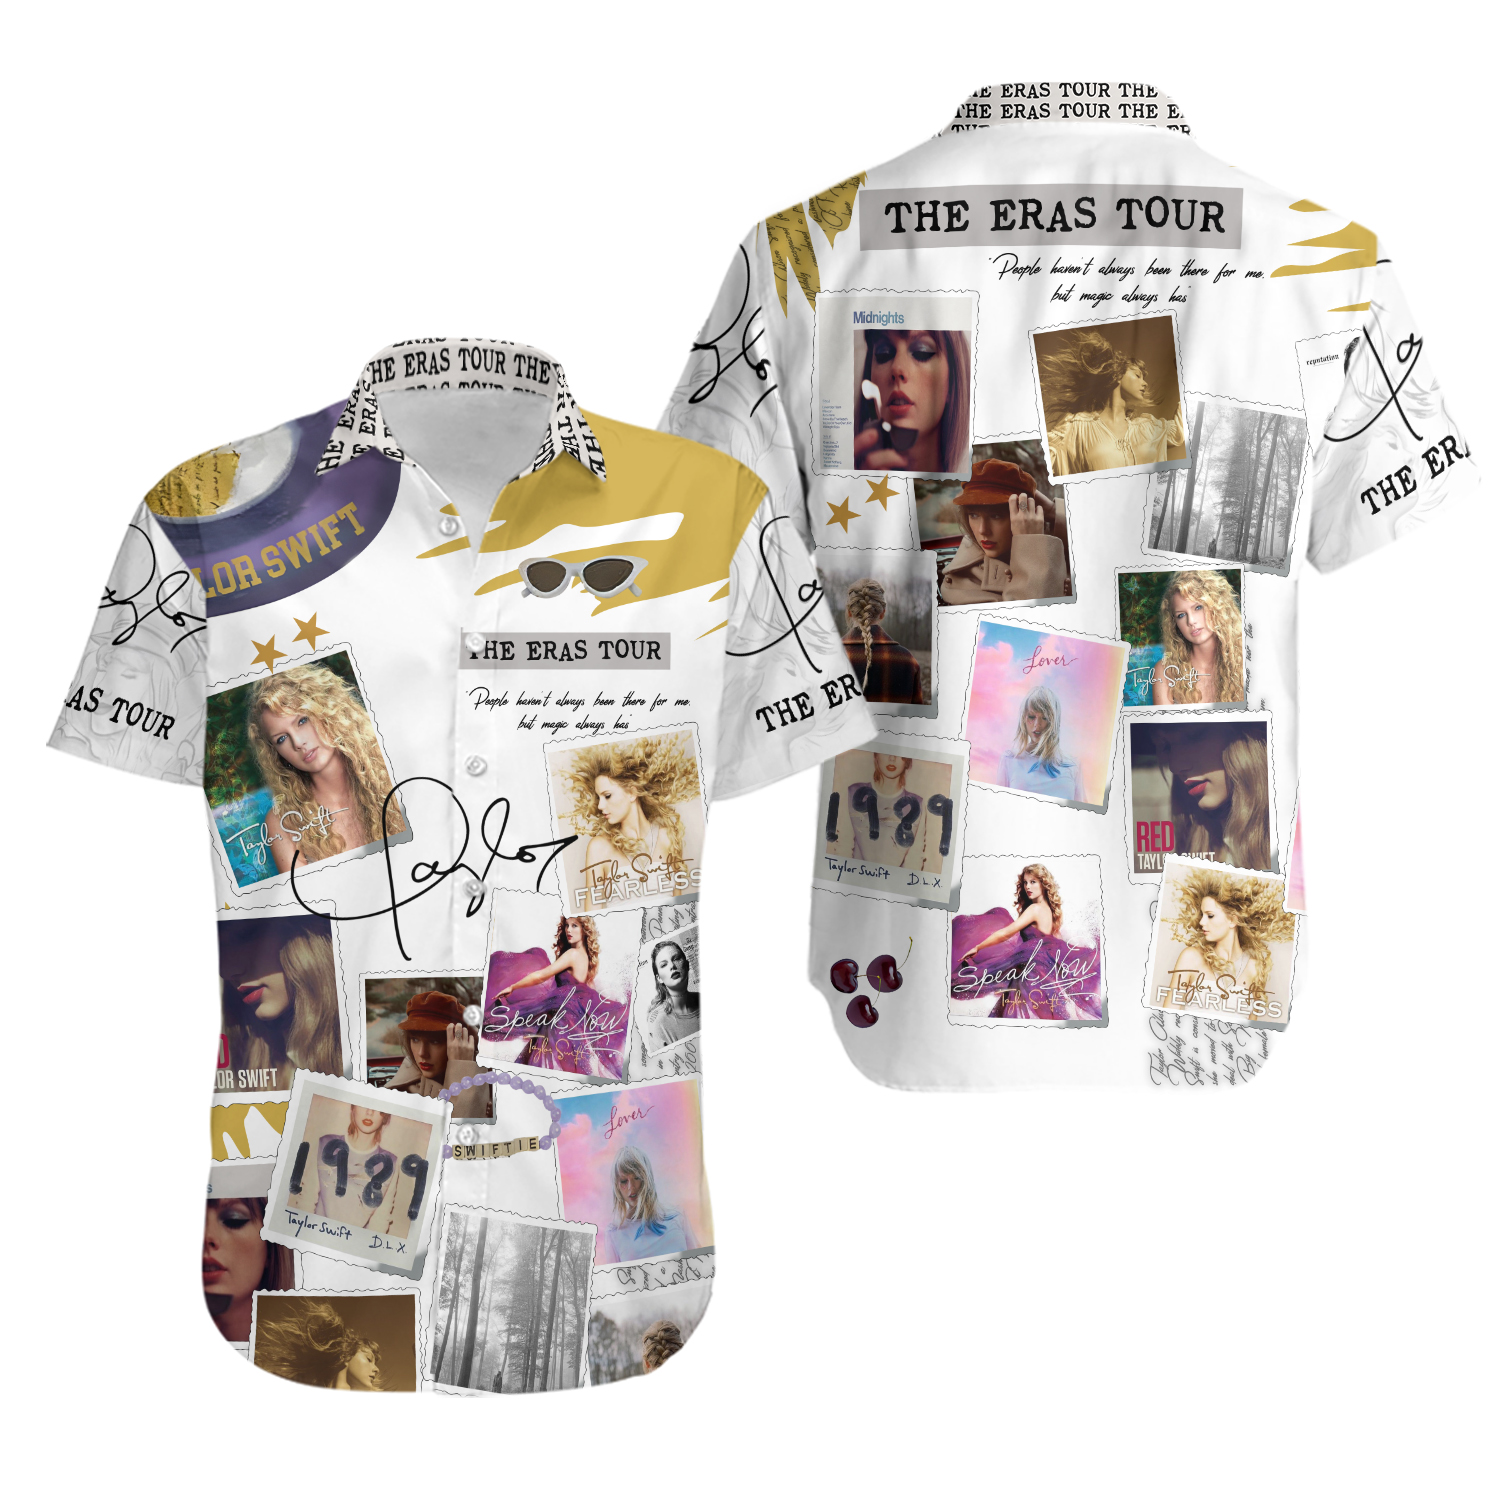 The Eras Tour Vintage Style Tshirt Taylor Swift - Trends Bedding